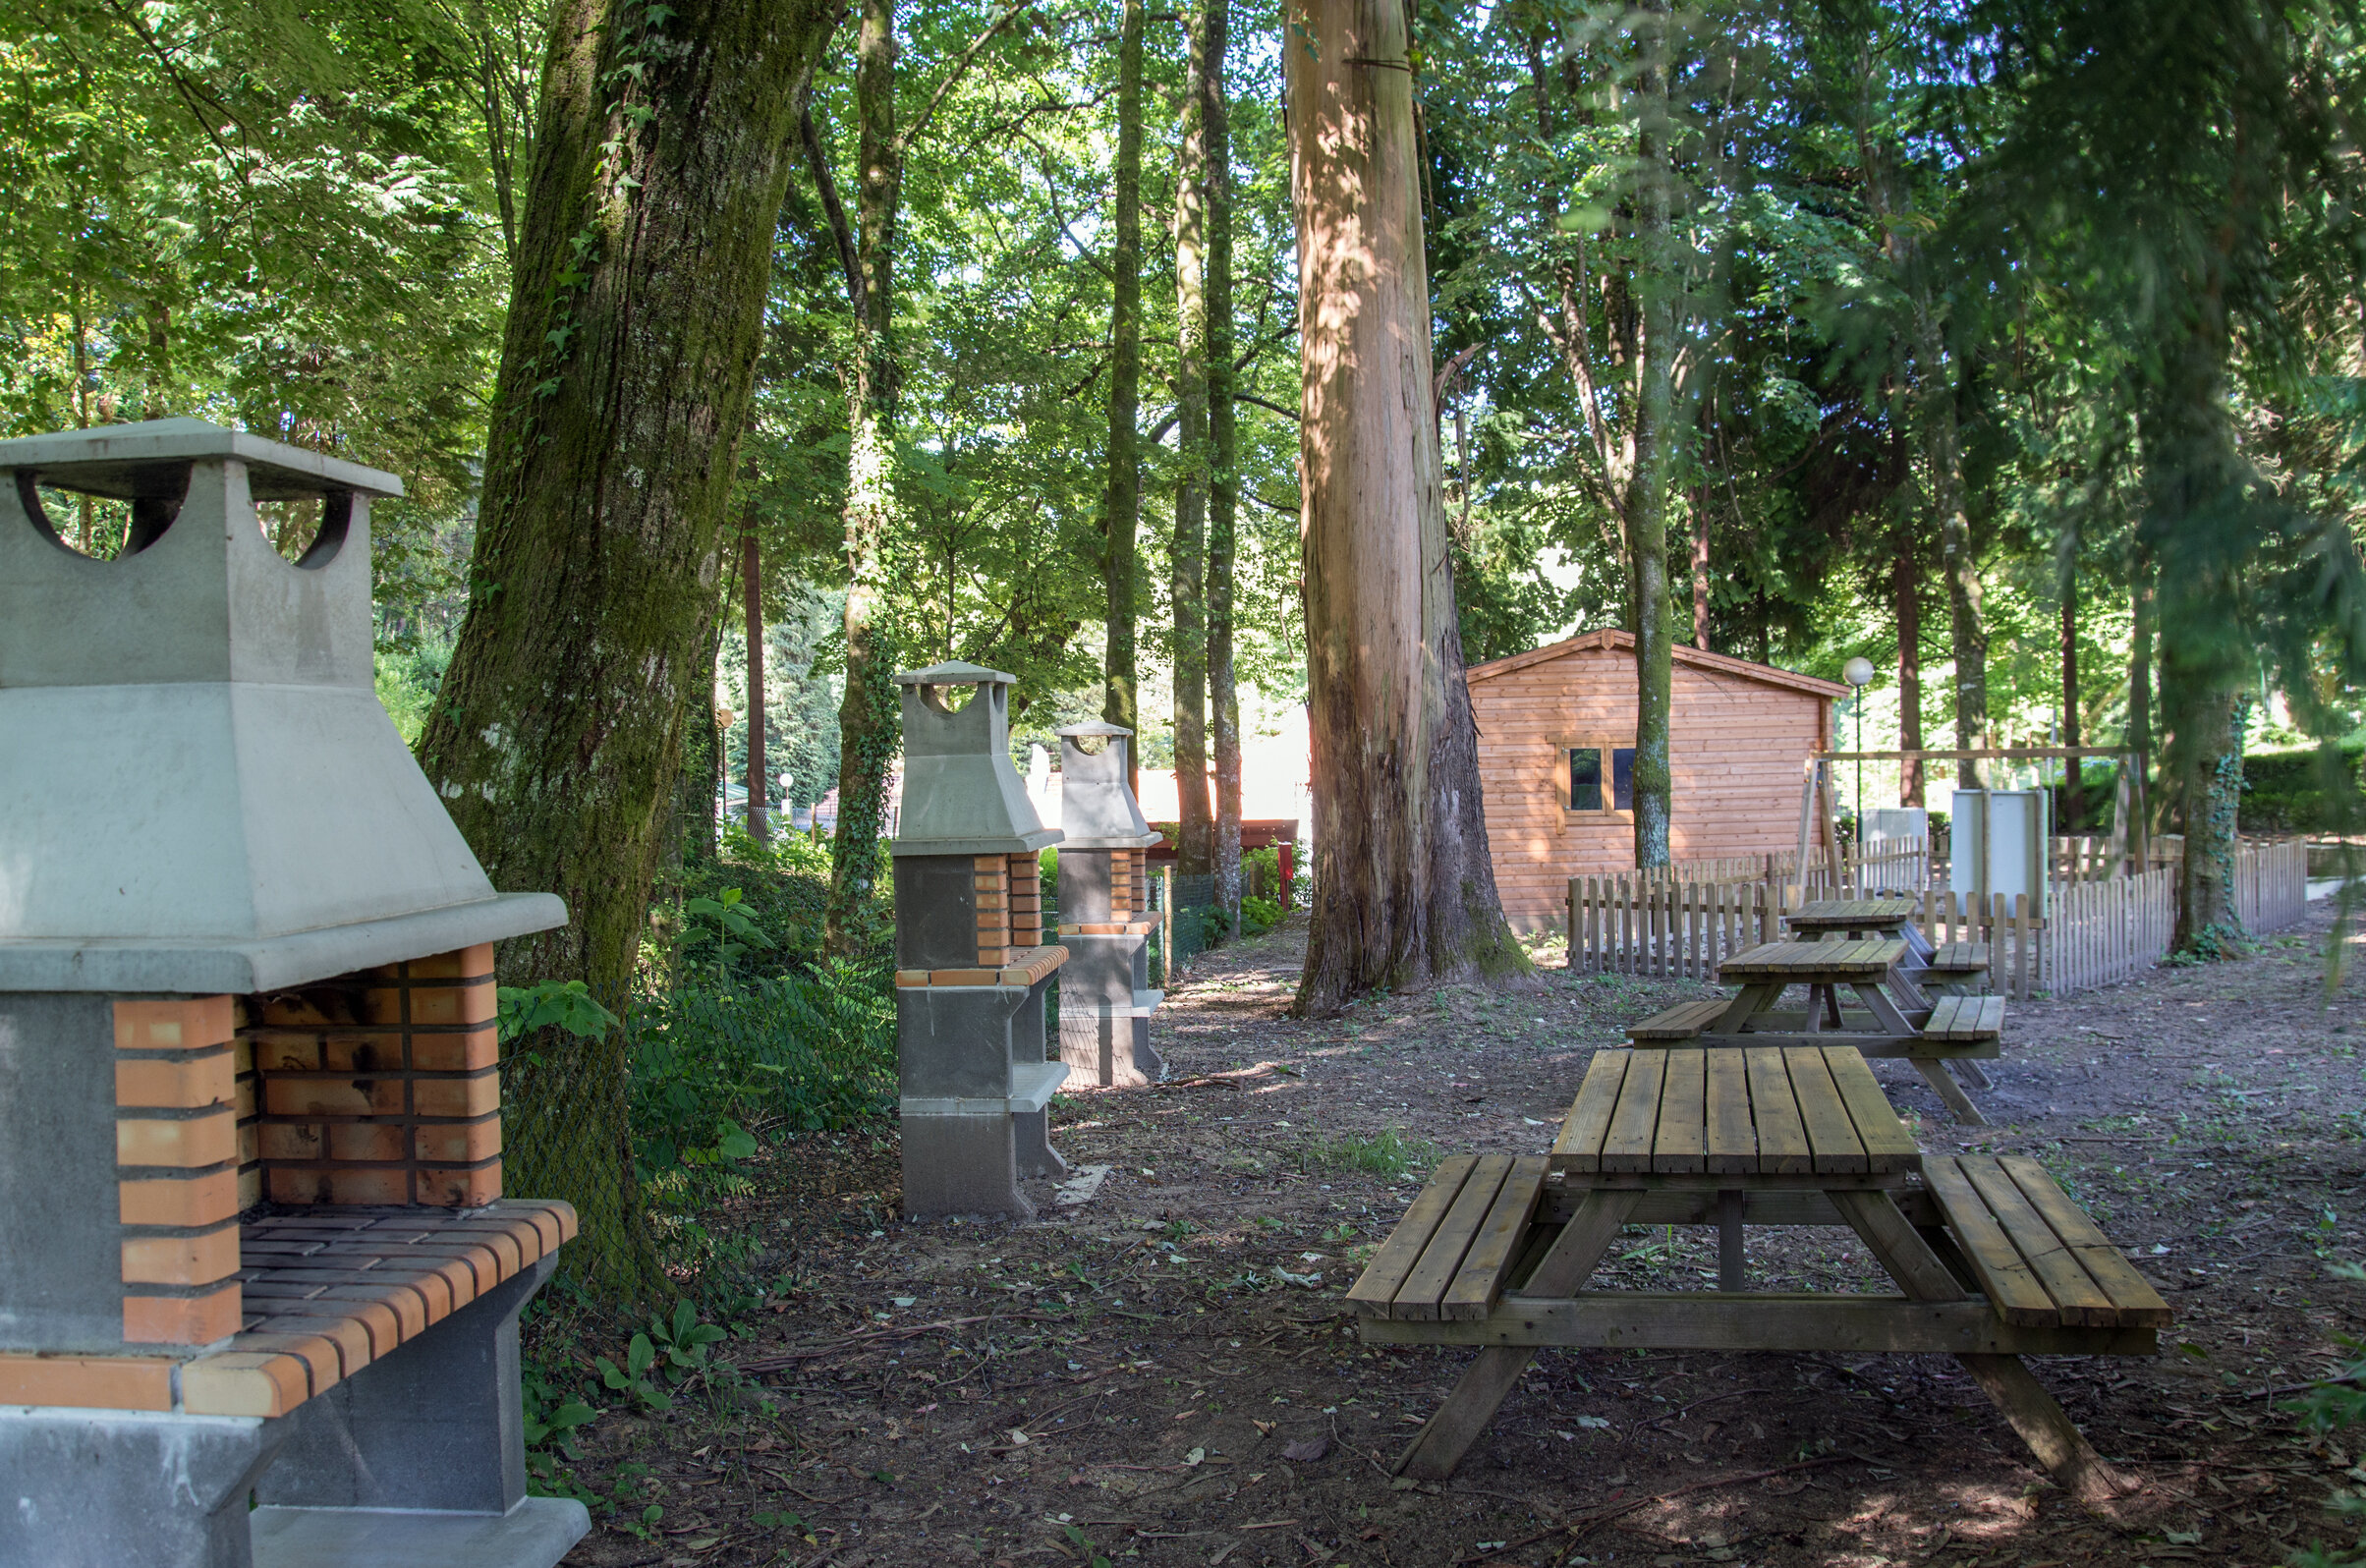 Camping Site Image